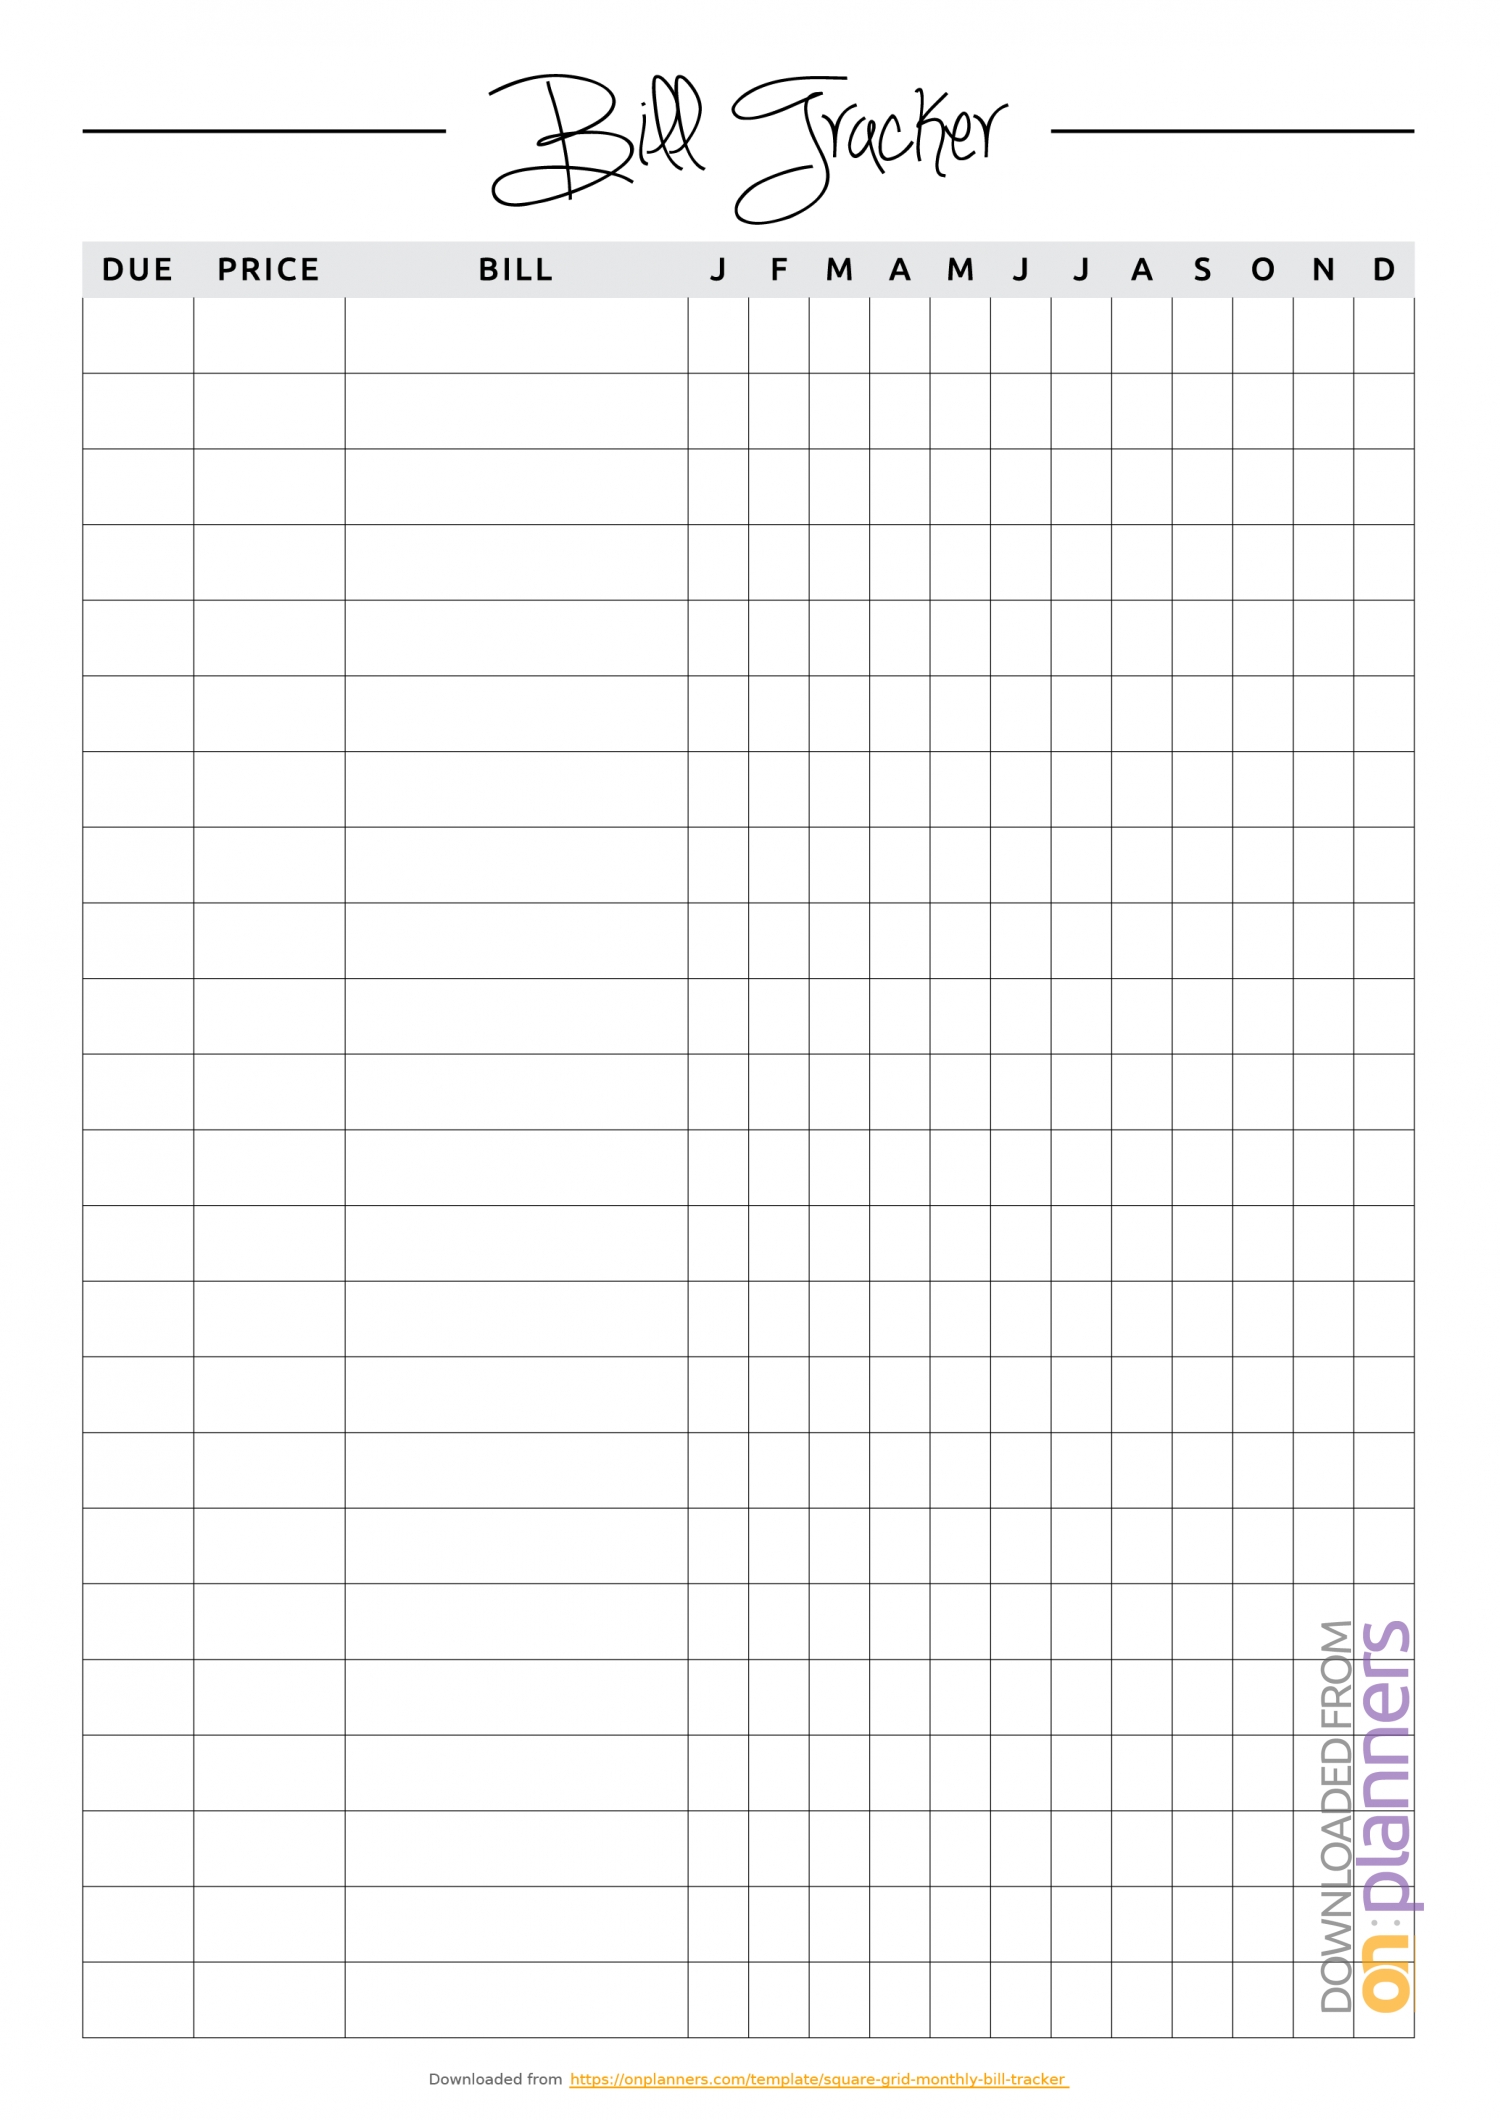 Download Printable Square Grid Monthly Bill Tracker Pdf-Blank Calendar To List Bills Due